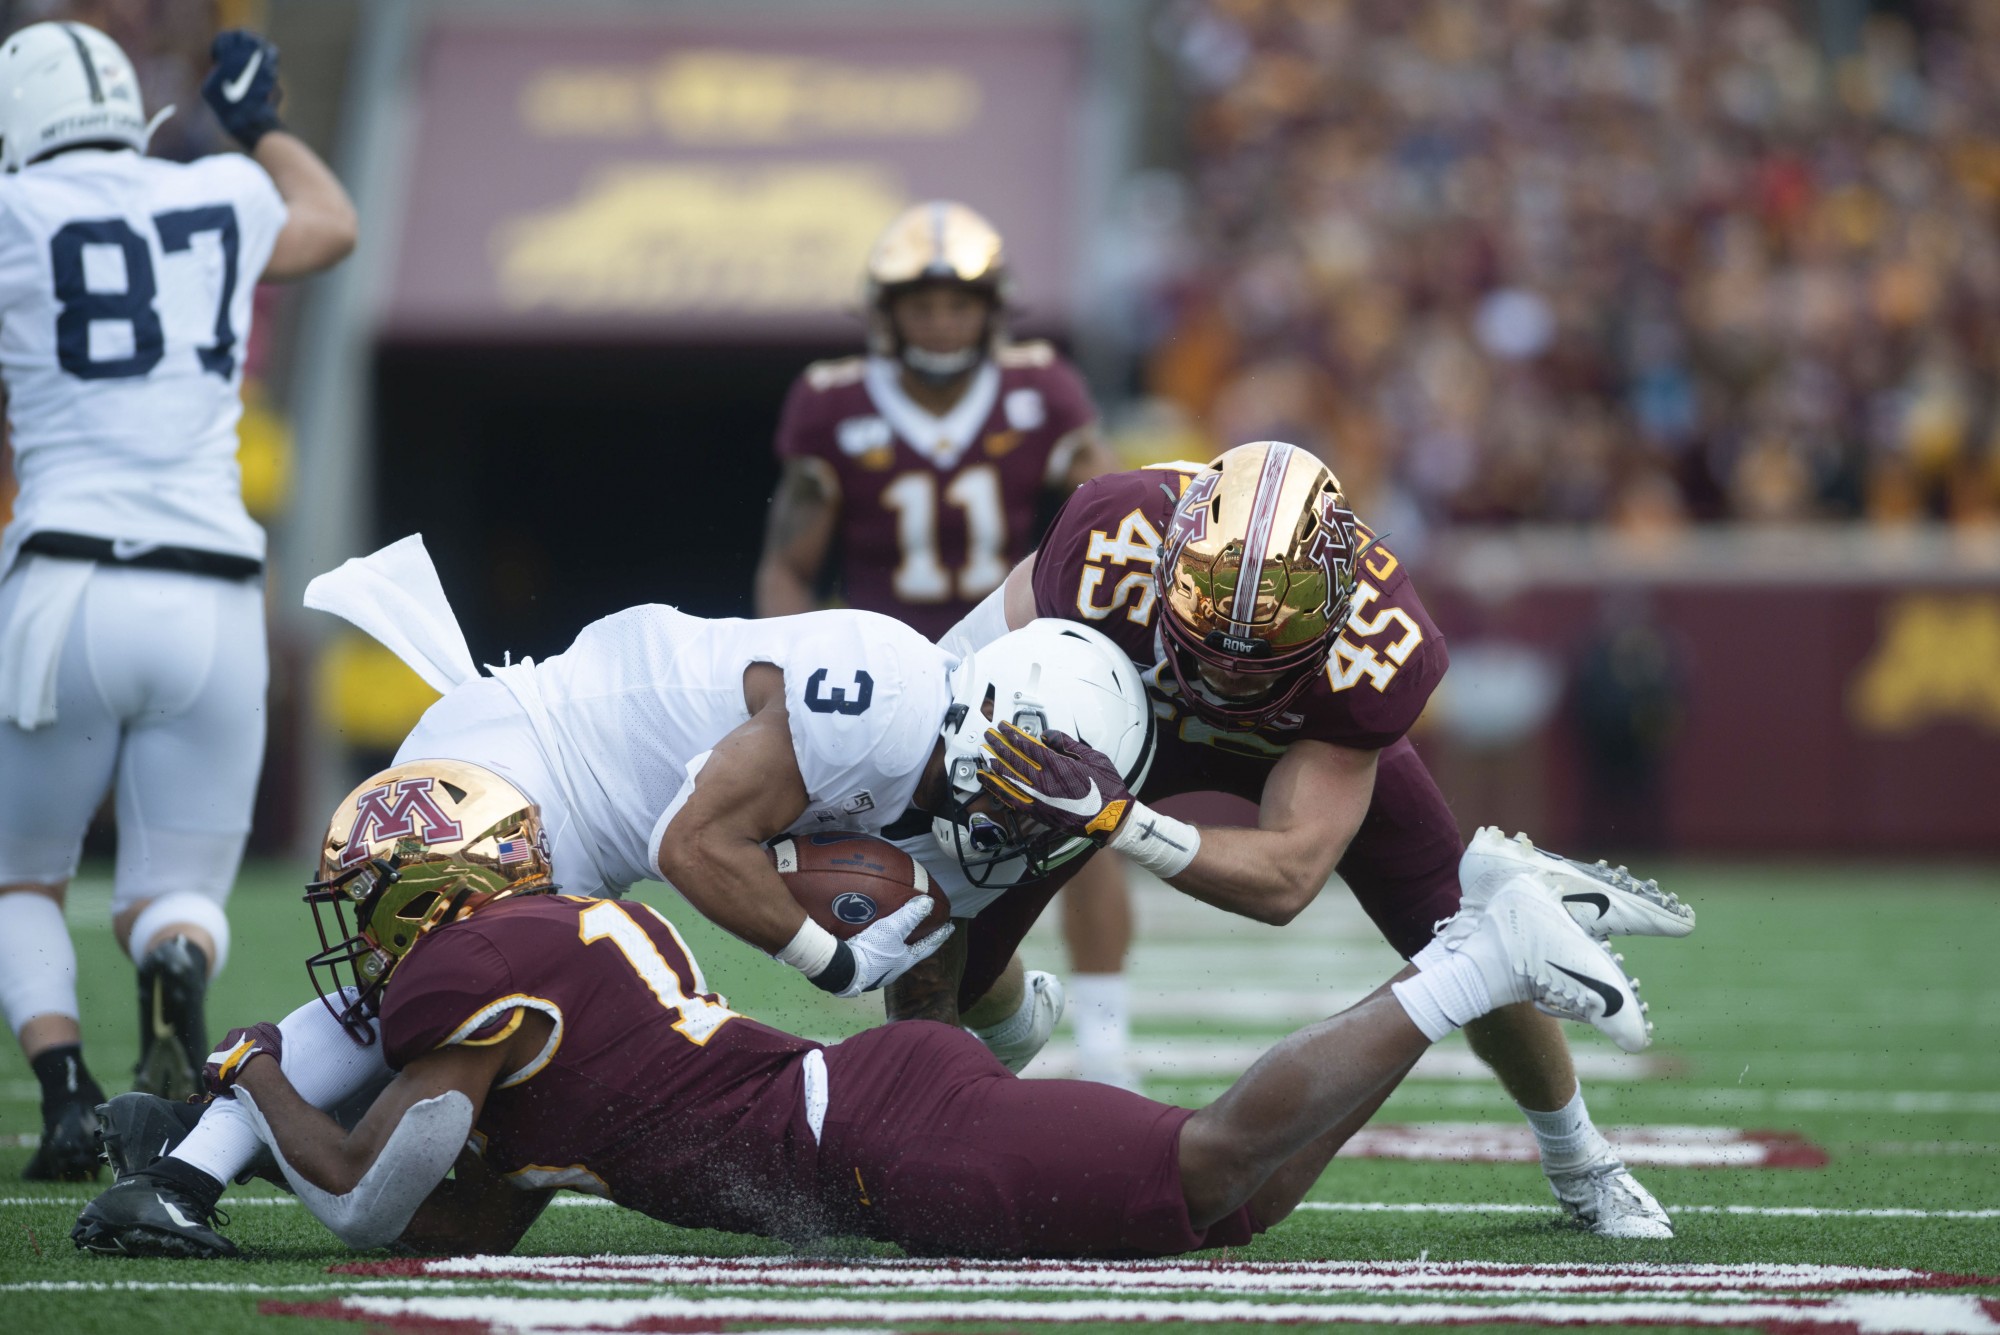 The Gophers bring down the Nittany Lions ball carrier at TCF Bank Stadium on Saturday, Nov. 9. They defeated Penn State 31-26 to bring their record to 9-0. A first since 1904. 